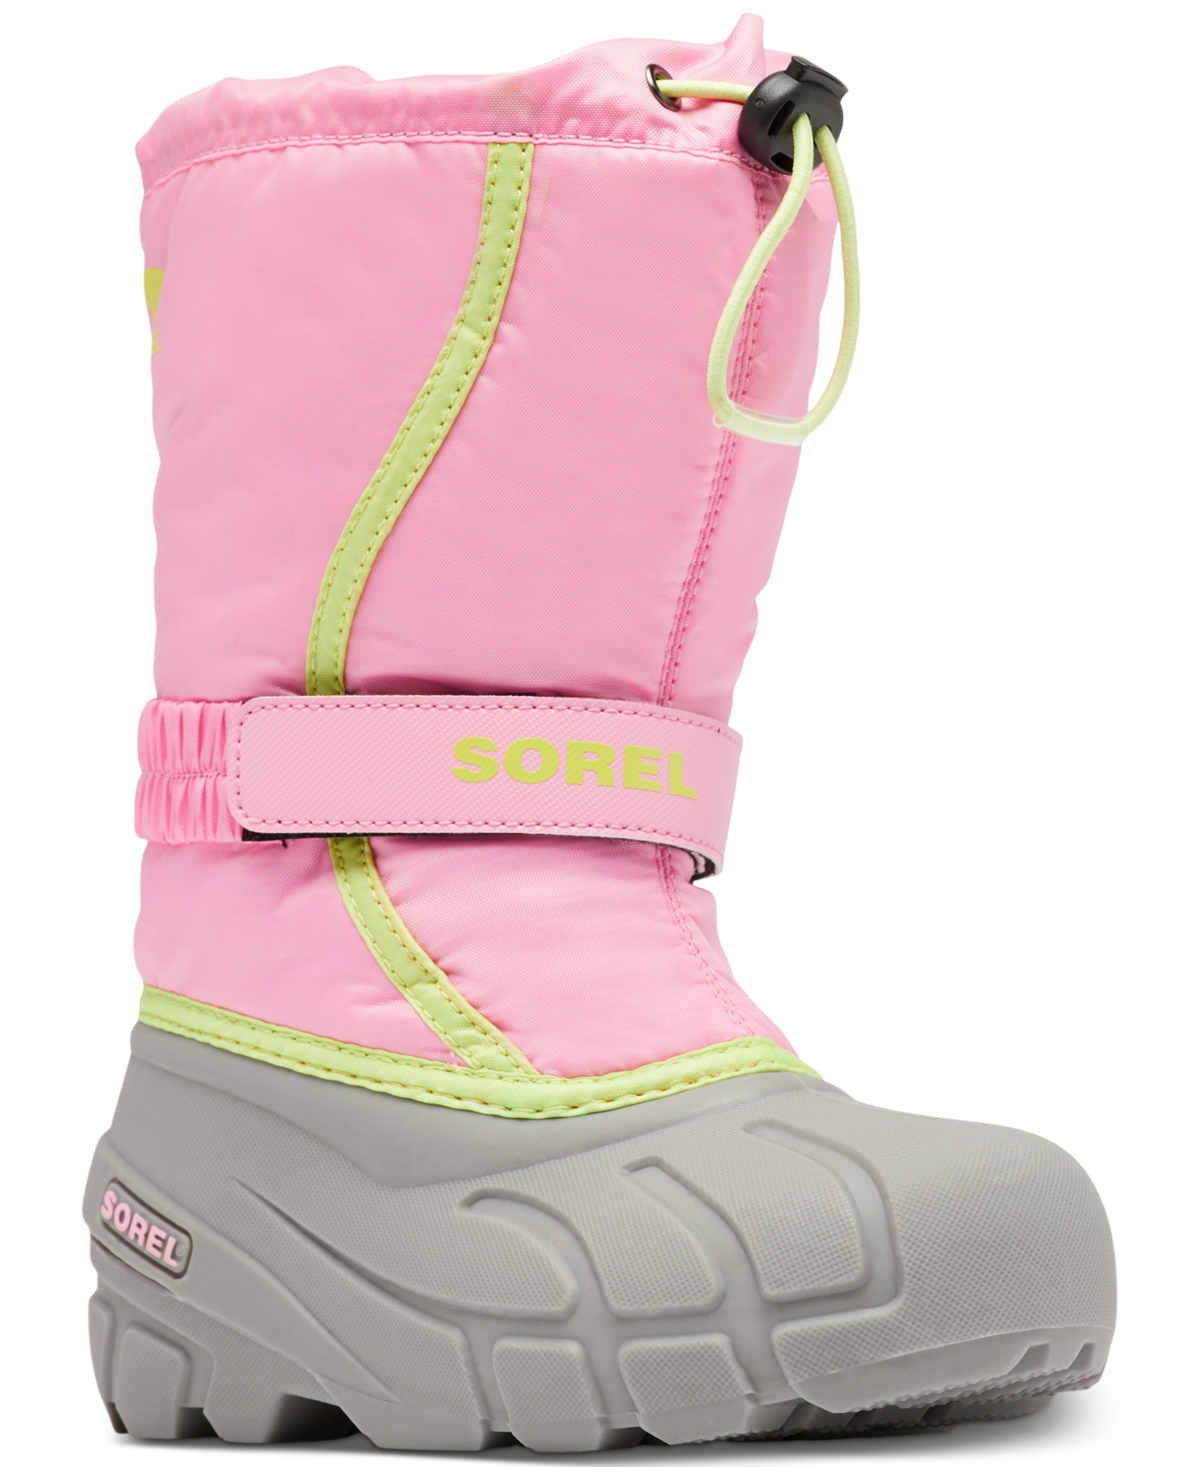 SOREL YOUTH FLURRY PRINTED COLD-WEATHER BOOTS